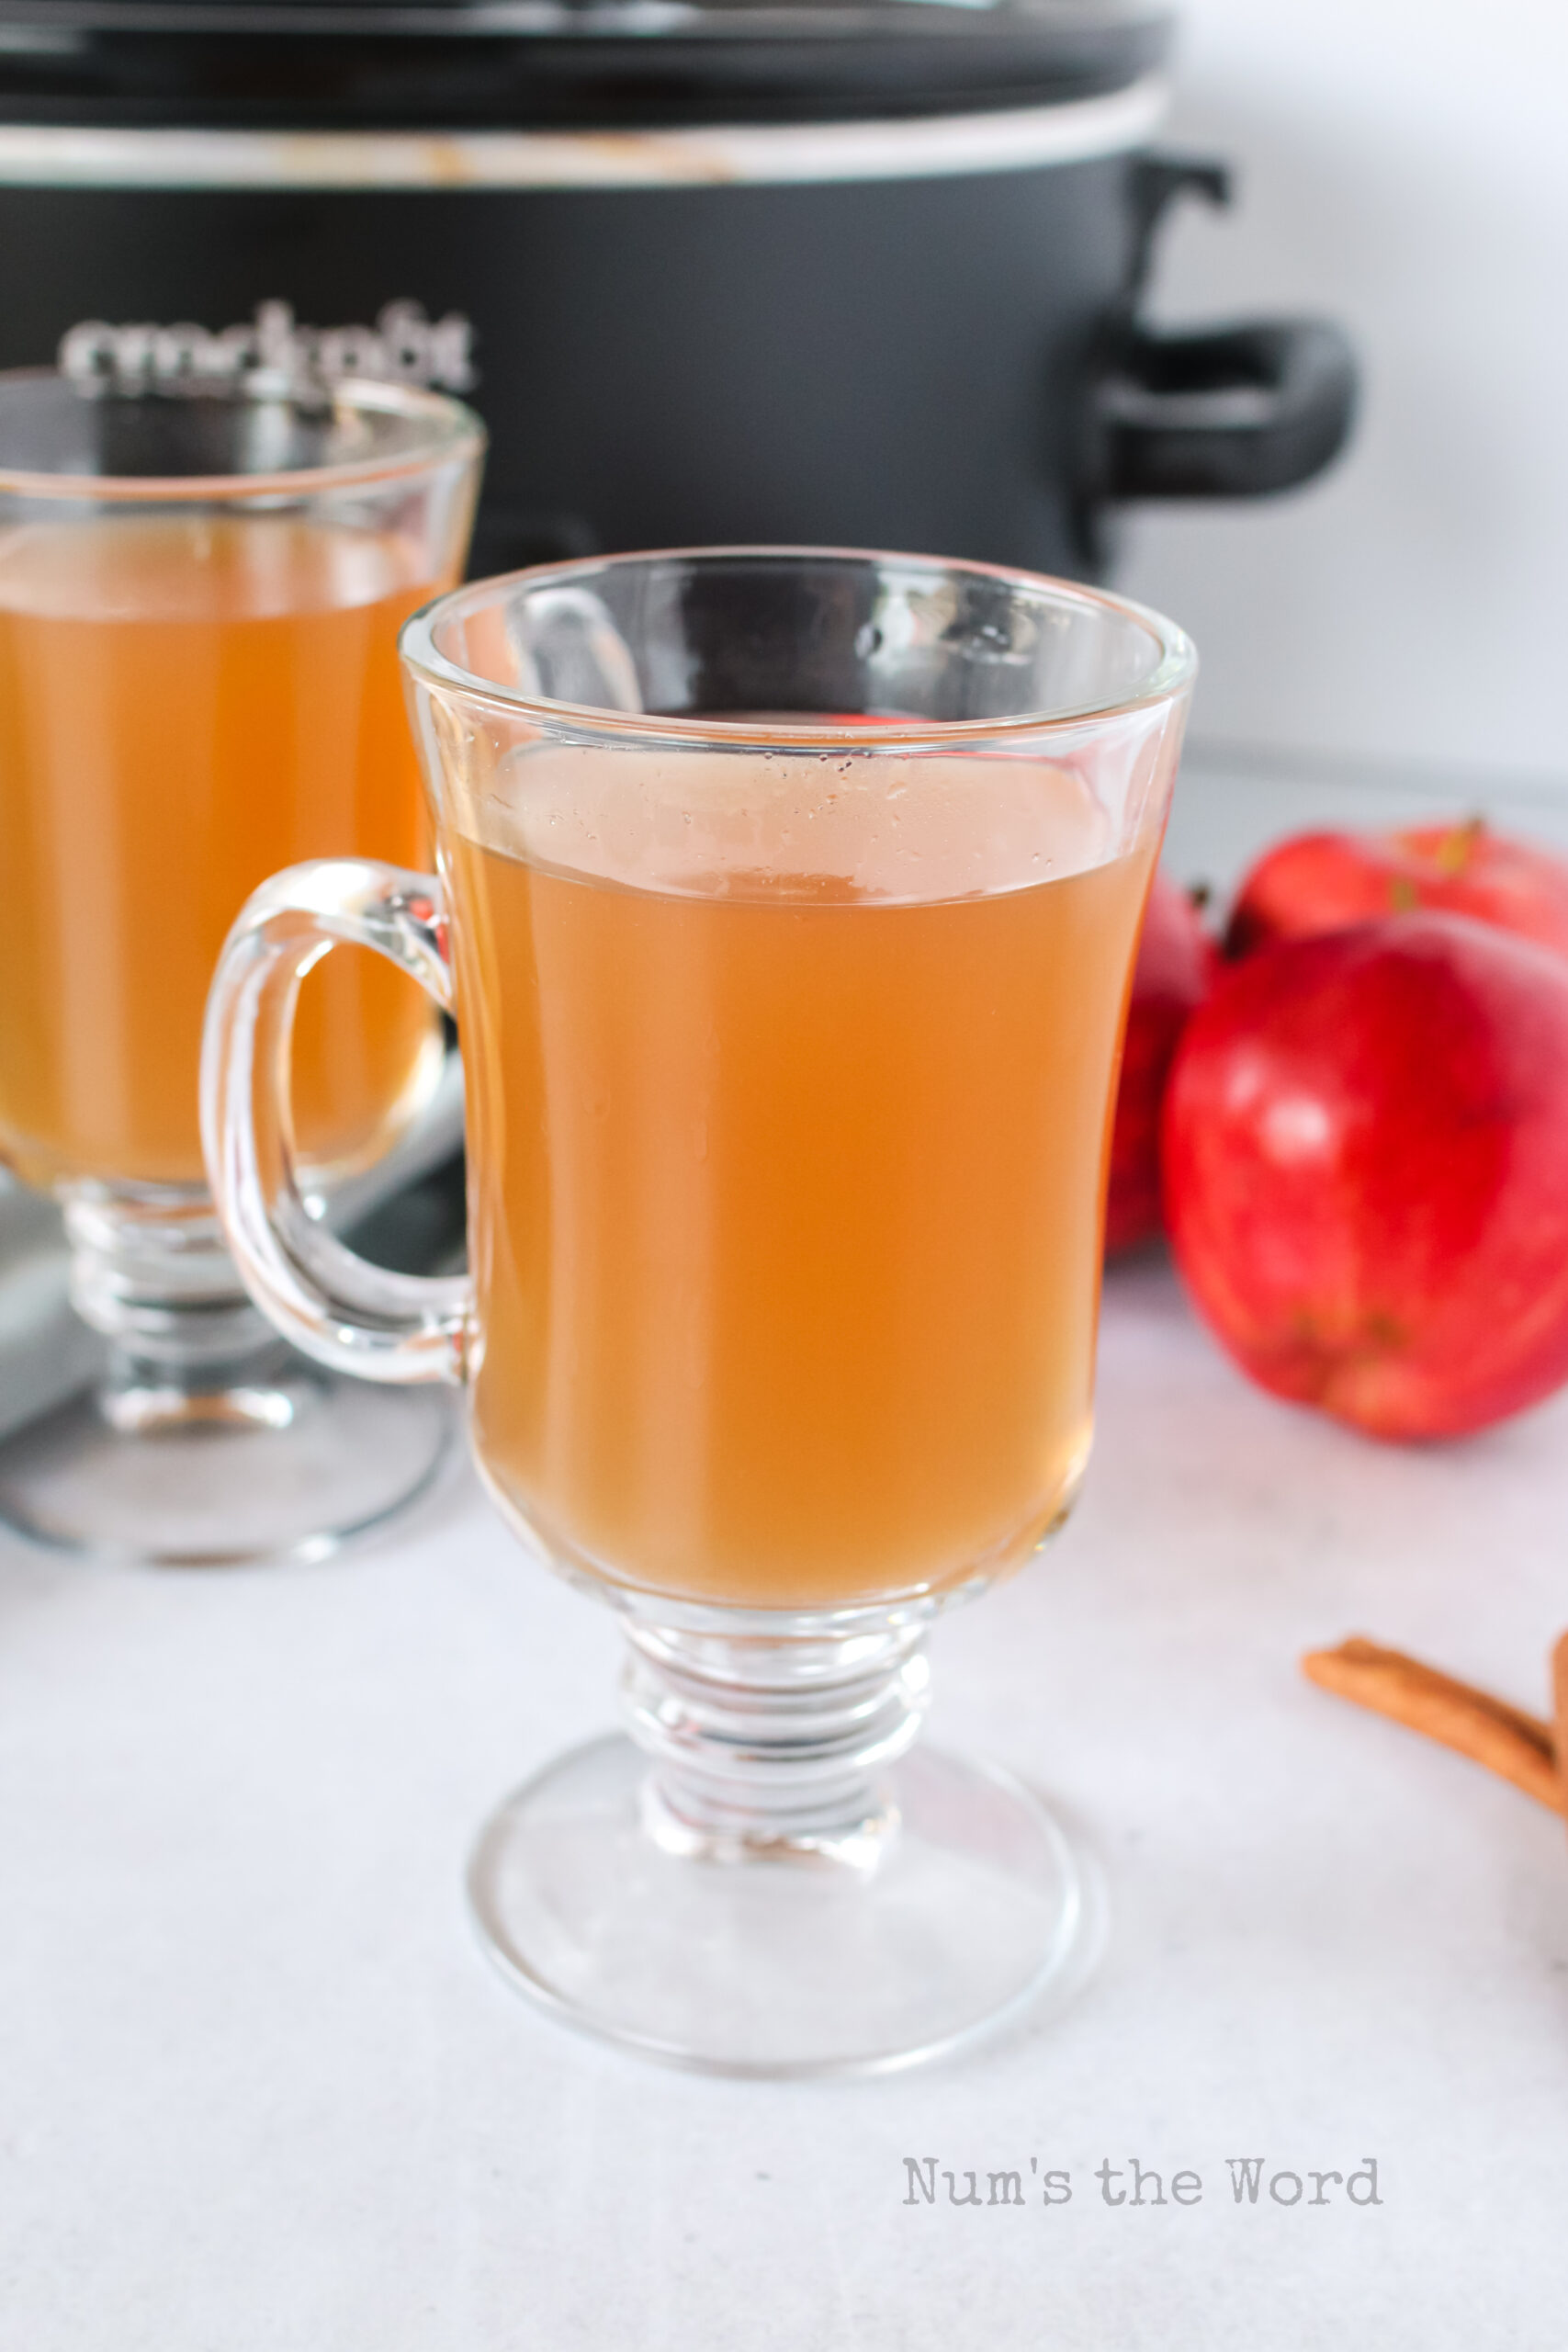 zoomed out view of apple cider in glasses